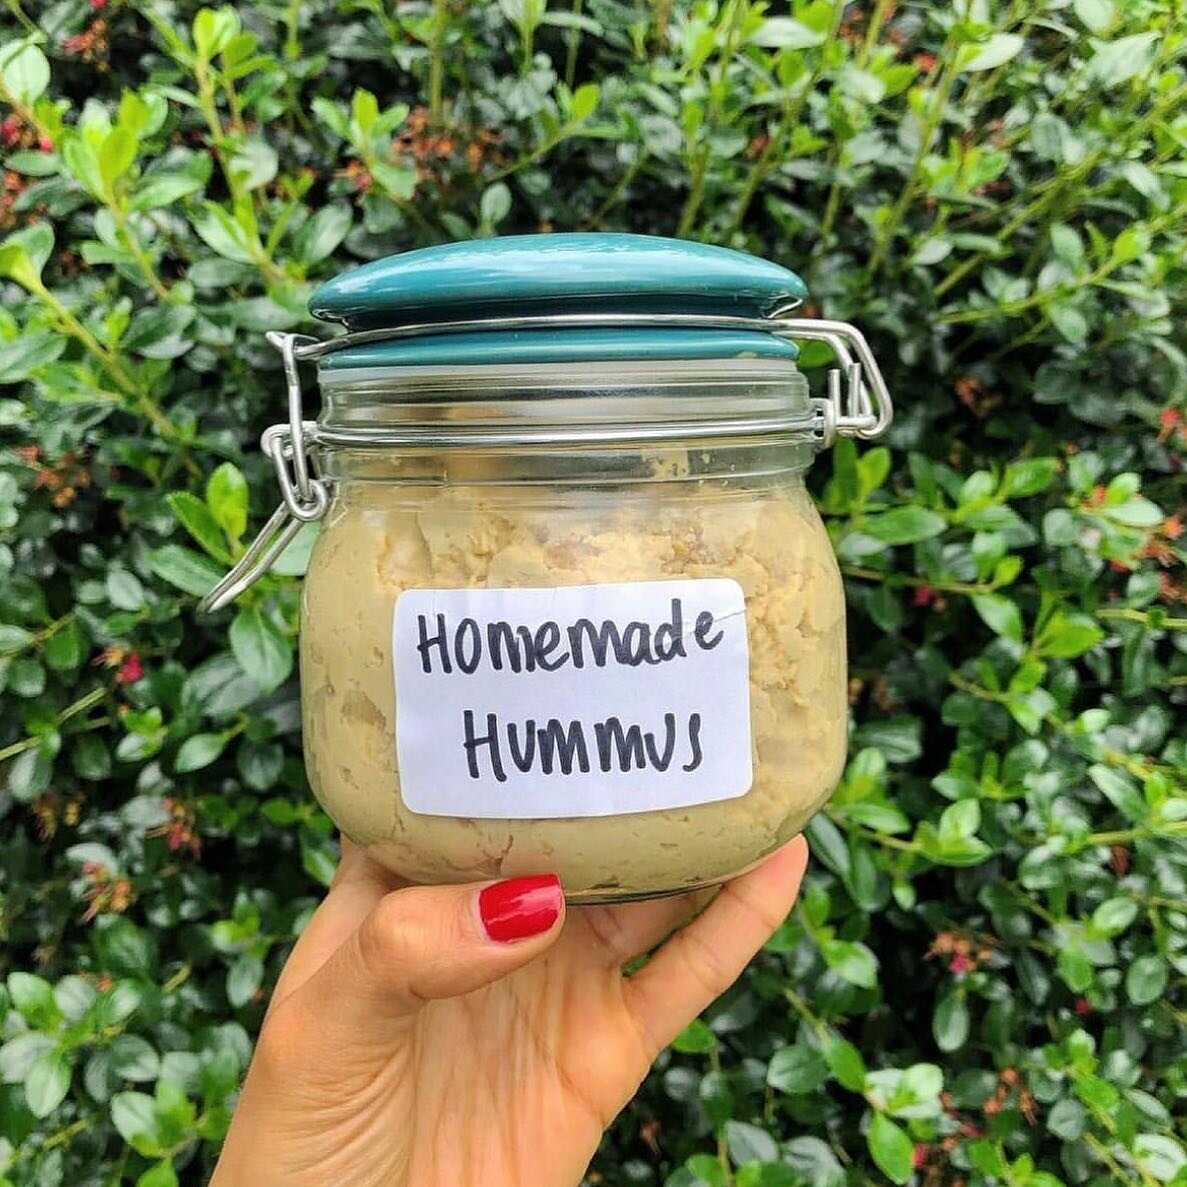 The homemade hummus debate 🤌

The ultimate condiment that I pair with almost anything and everything &ndash; rich in protein, fibre and minerals it just makes everything so much better right? 🤷🏻&zwj;♀️ I always have a tub to hand in the fridge but